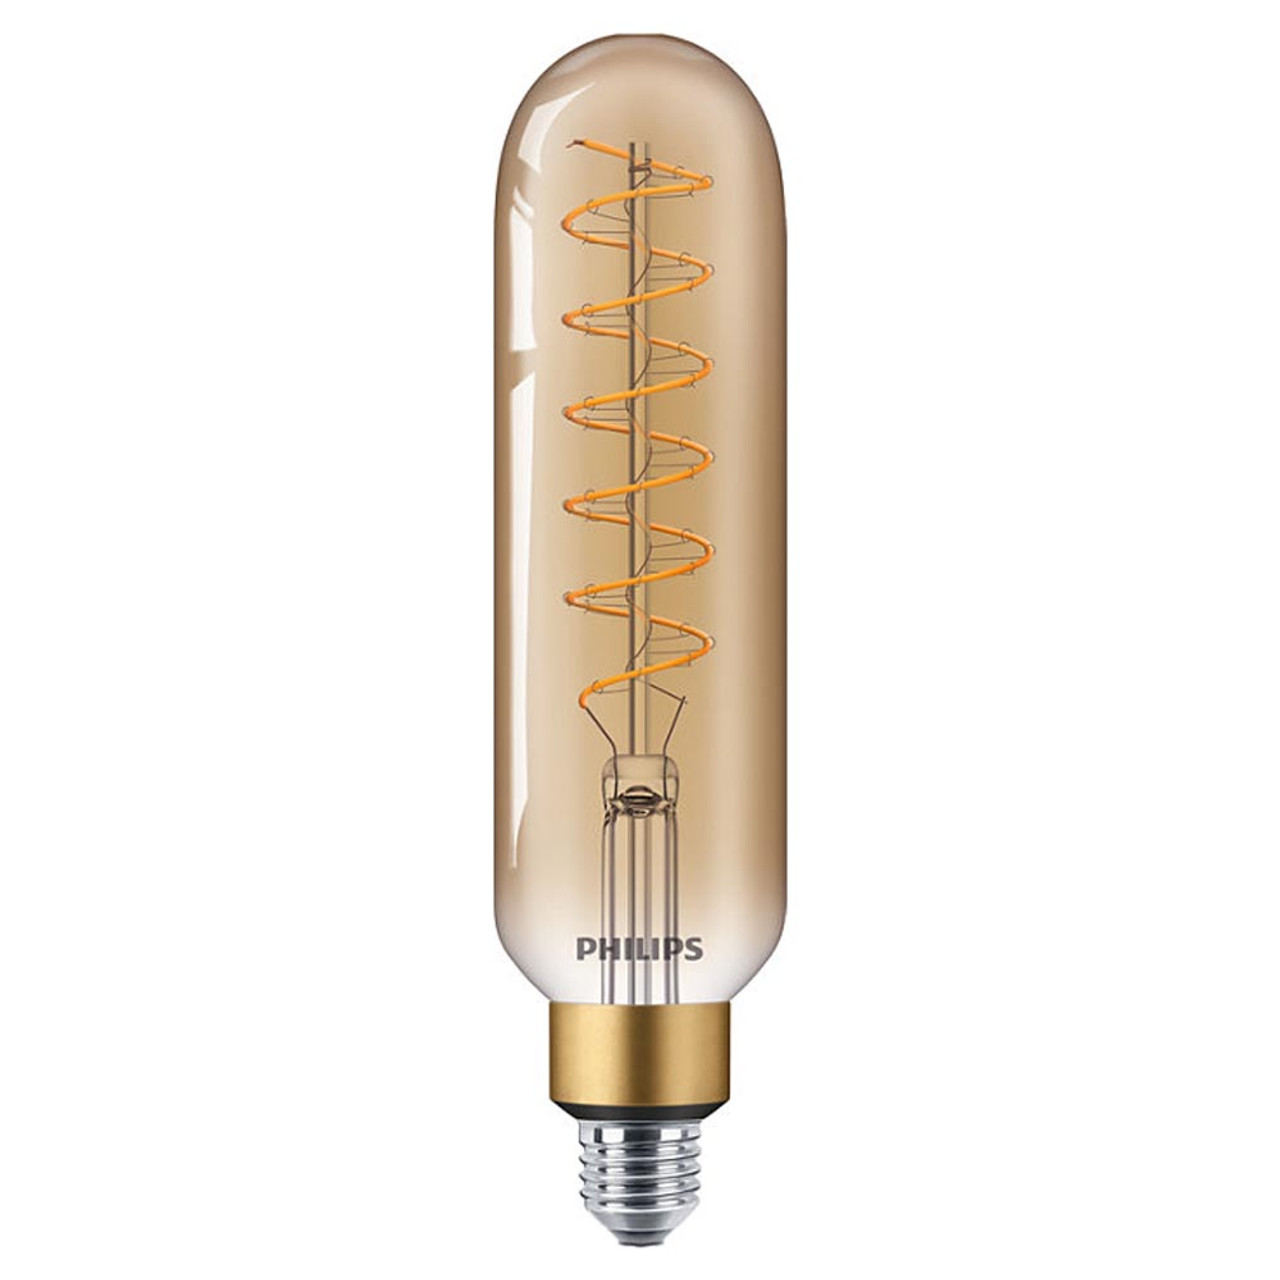 LED Classic Giant Tubular Lamp 7W E27 T65 Gold Dimmable Philips